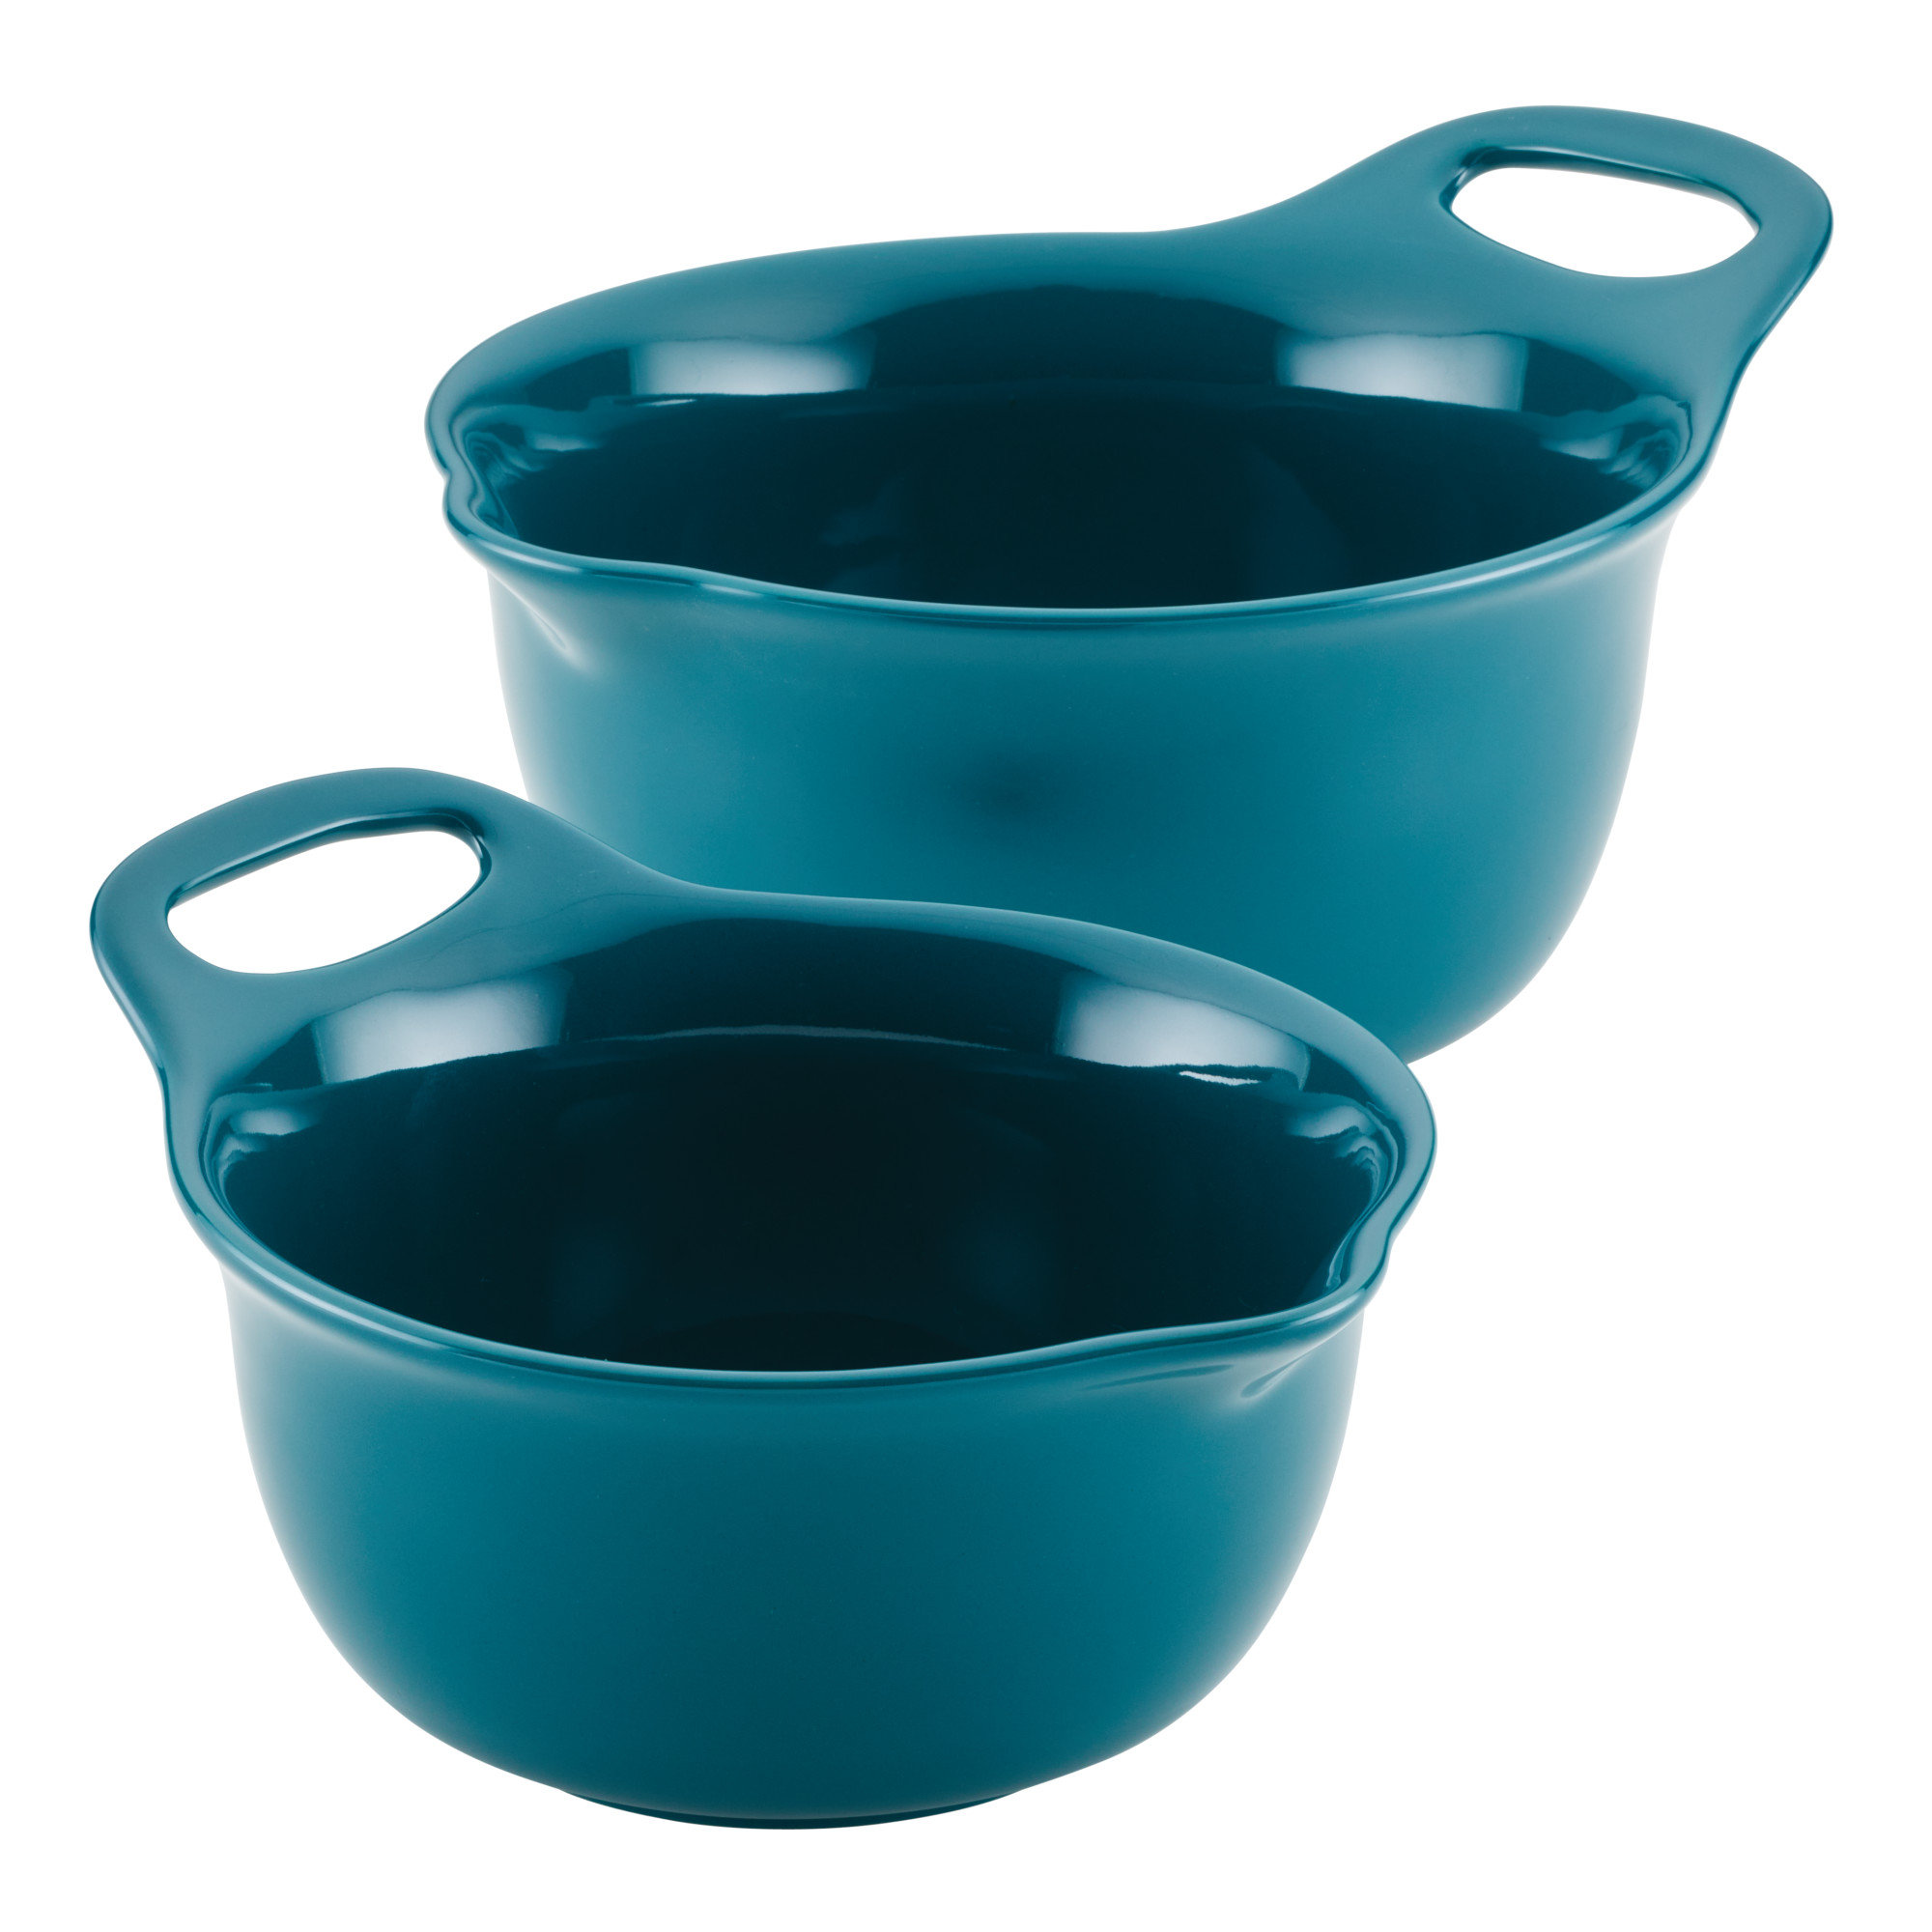 Ceramic Large Mixing Bowls - Set of 2 Nesting Bowls for Kitchen Stoneware,  Oven, Microwave and Dishwasher Safe